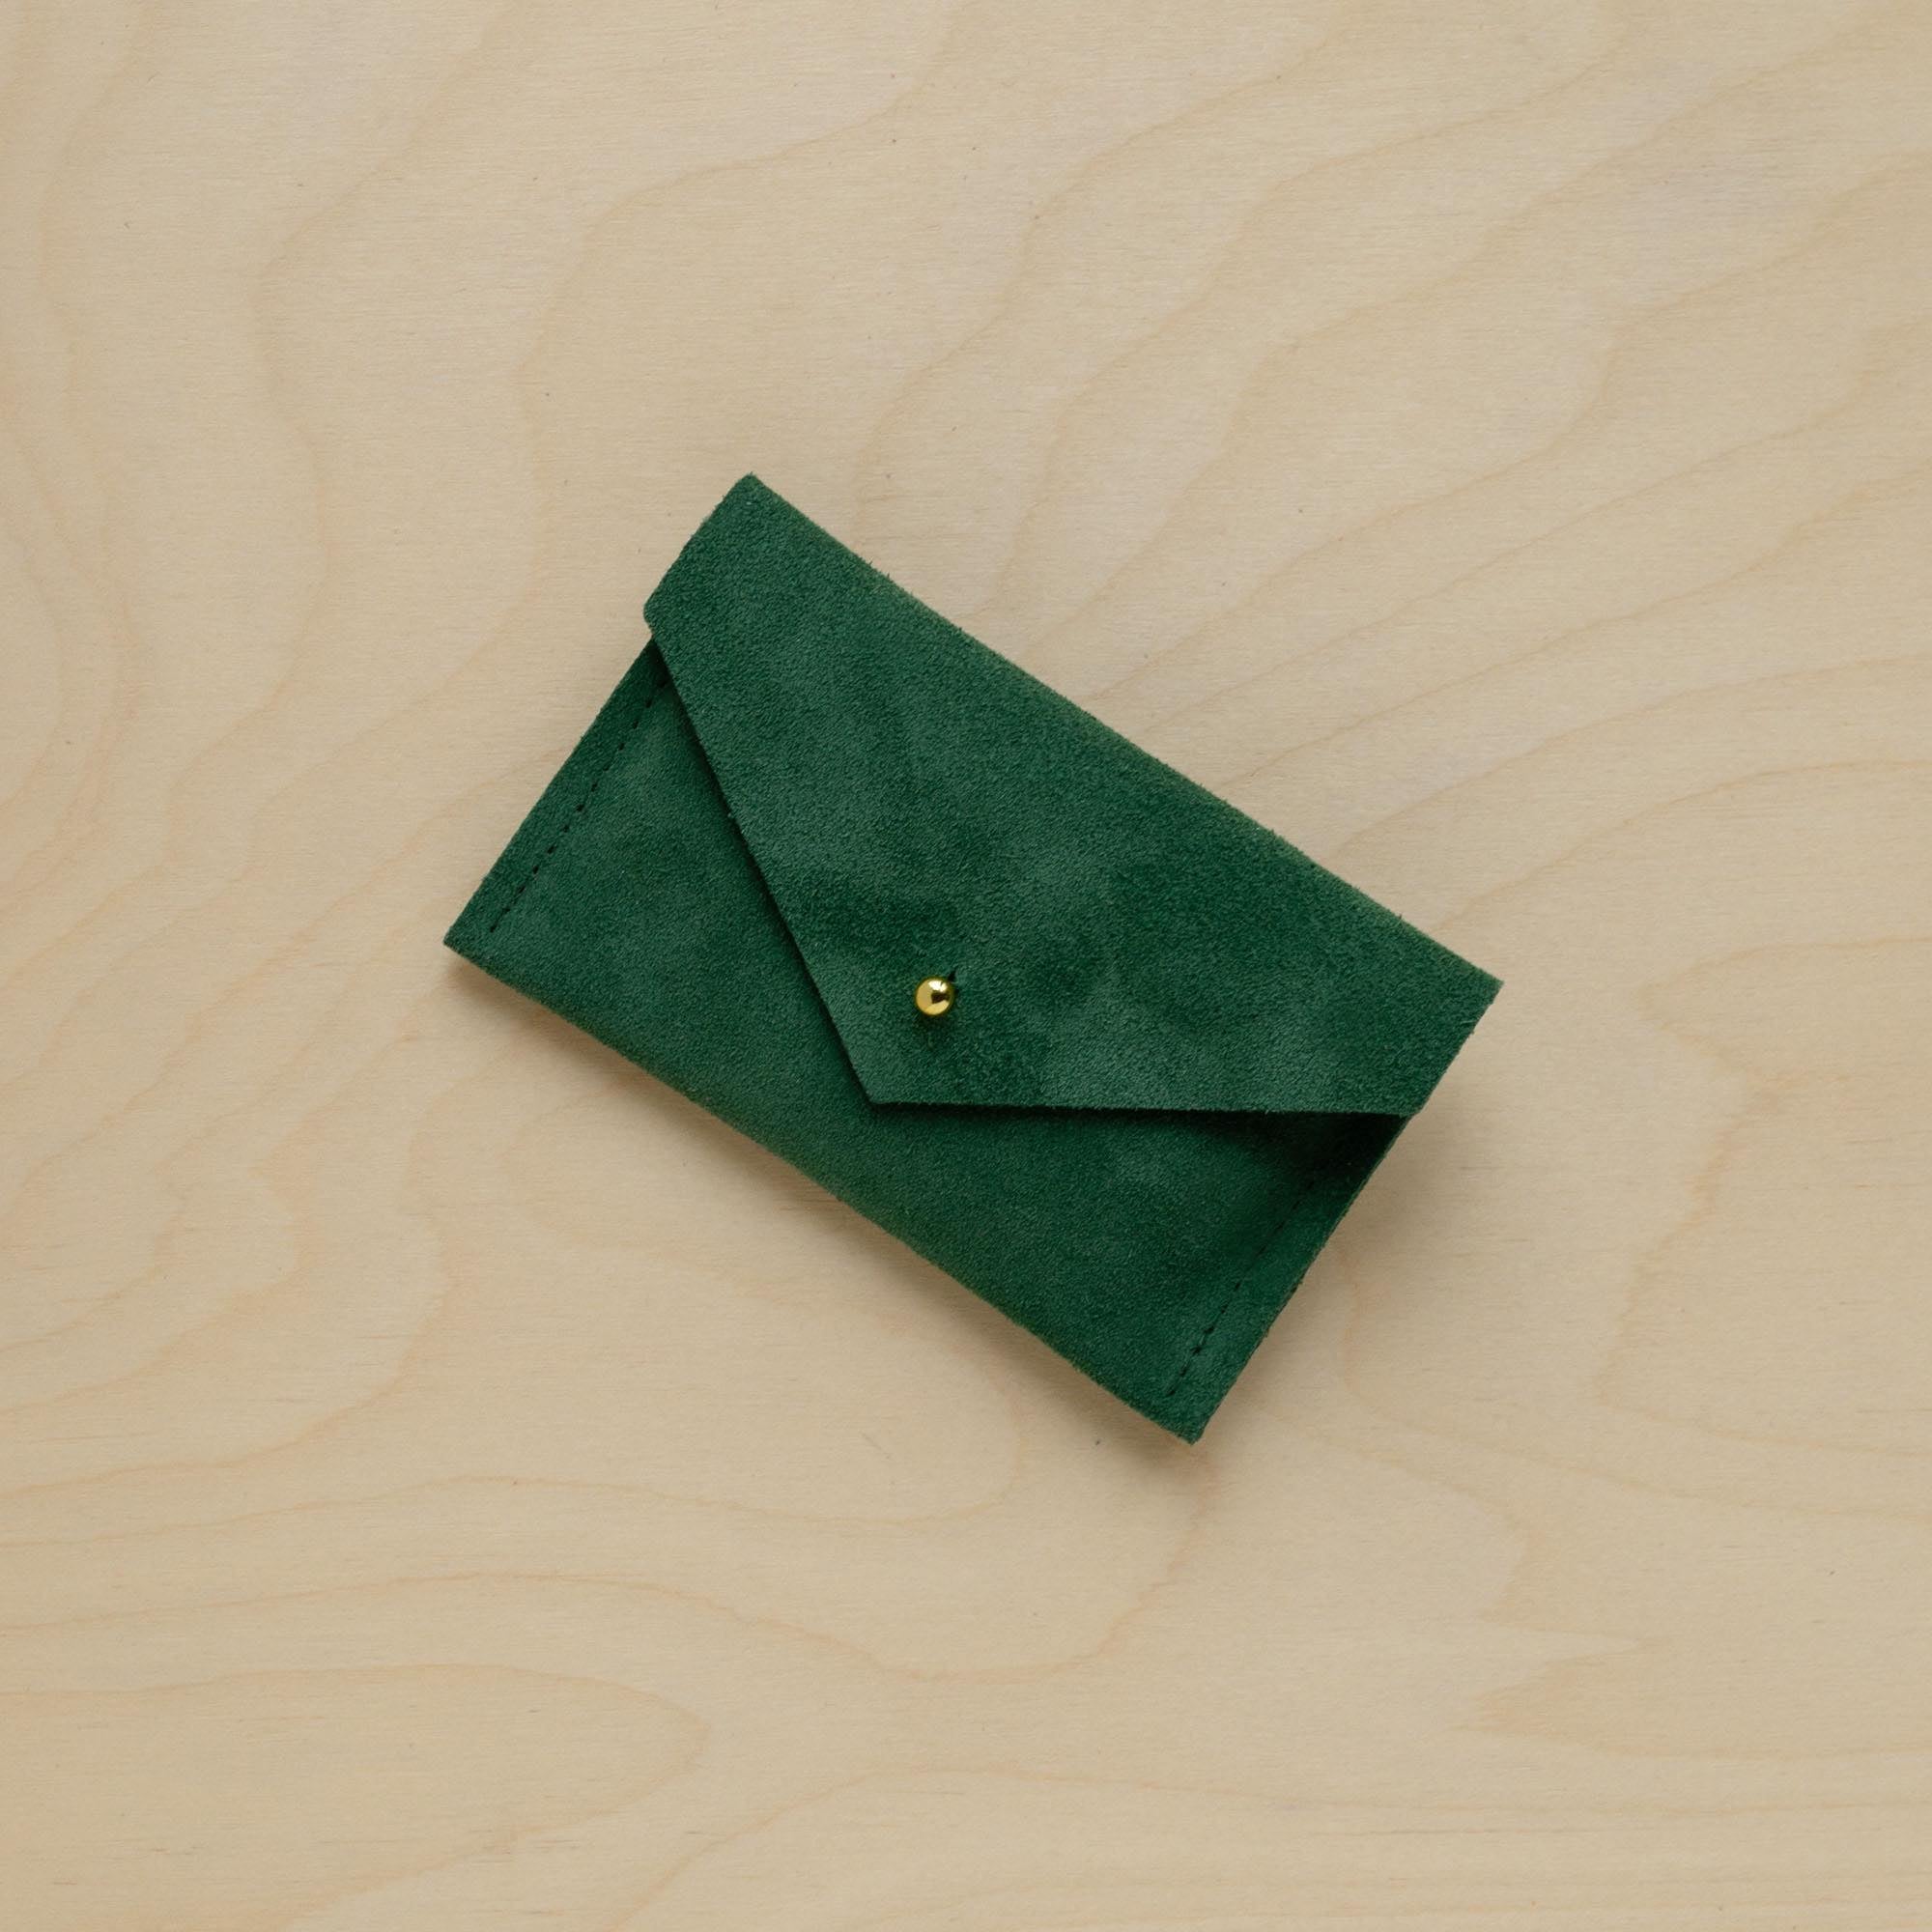 A suede Small Notions Pouch in Moss Green. Complete with a stud for secure closing.